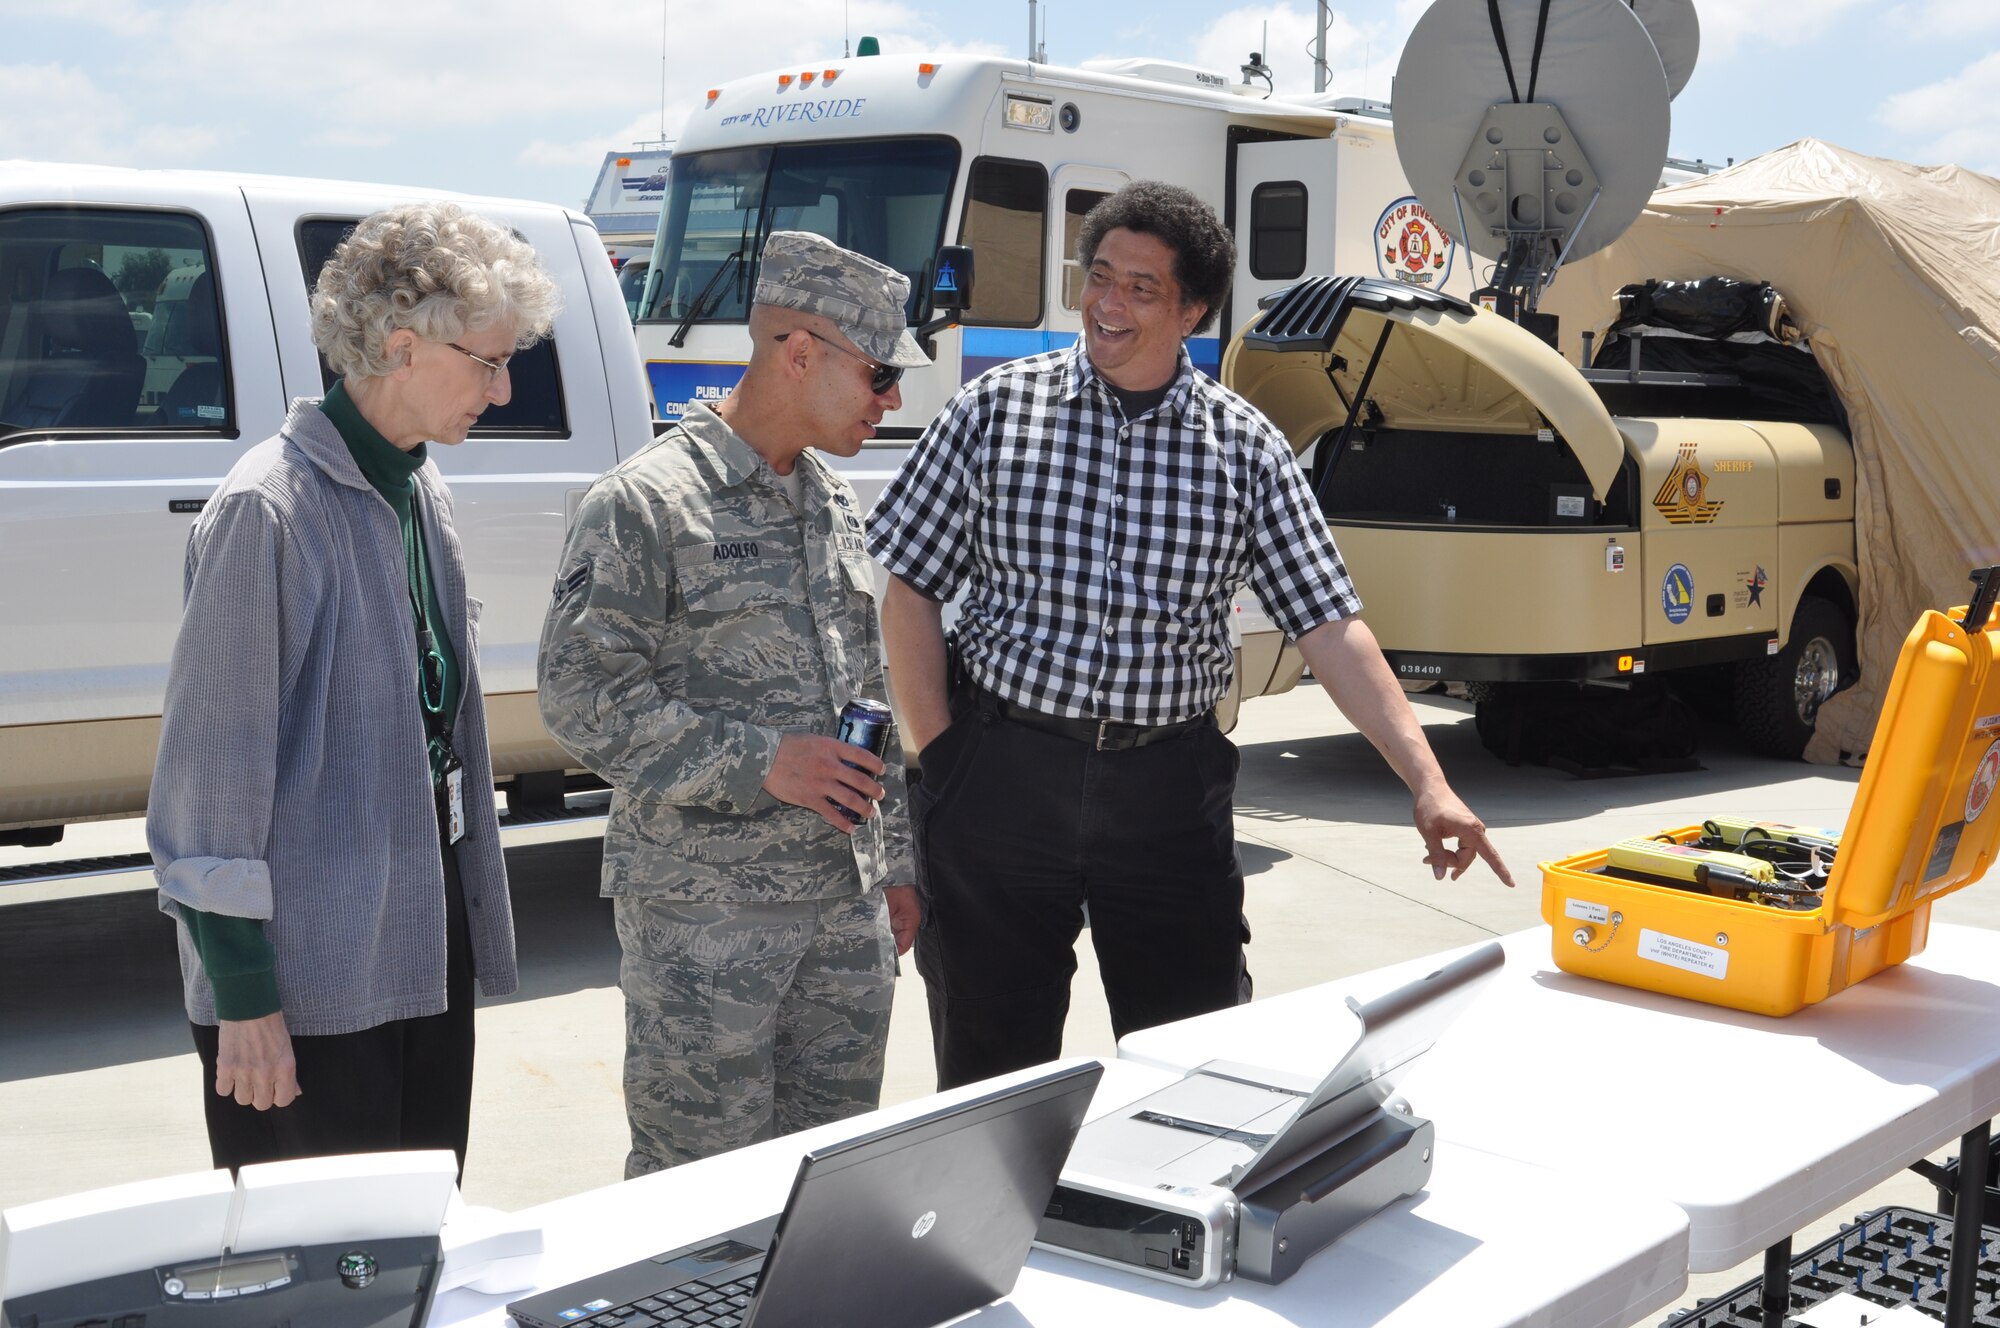 (from right) Barry Cannon, 452nd Communications Squadron, discusses communication equipment on display at the 3rd Annual Riverside County Multi-Agency Communication Interoperability Test with Airman 1st Class David Adolfo, 452nd Emergency Management Flight, and Nancy Driscoll, chief of bioenvironmental engineering and public health at March Air Reserve Base.  The interoperability test was held at the Ben Clark Training Center in Riverside, Calif., May 19, 2011.  (U.S. Air Force photo/ Megan Just)